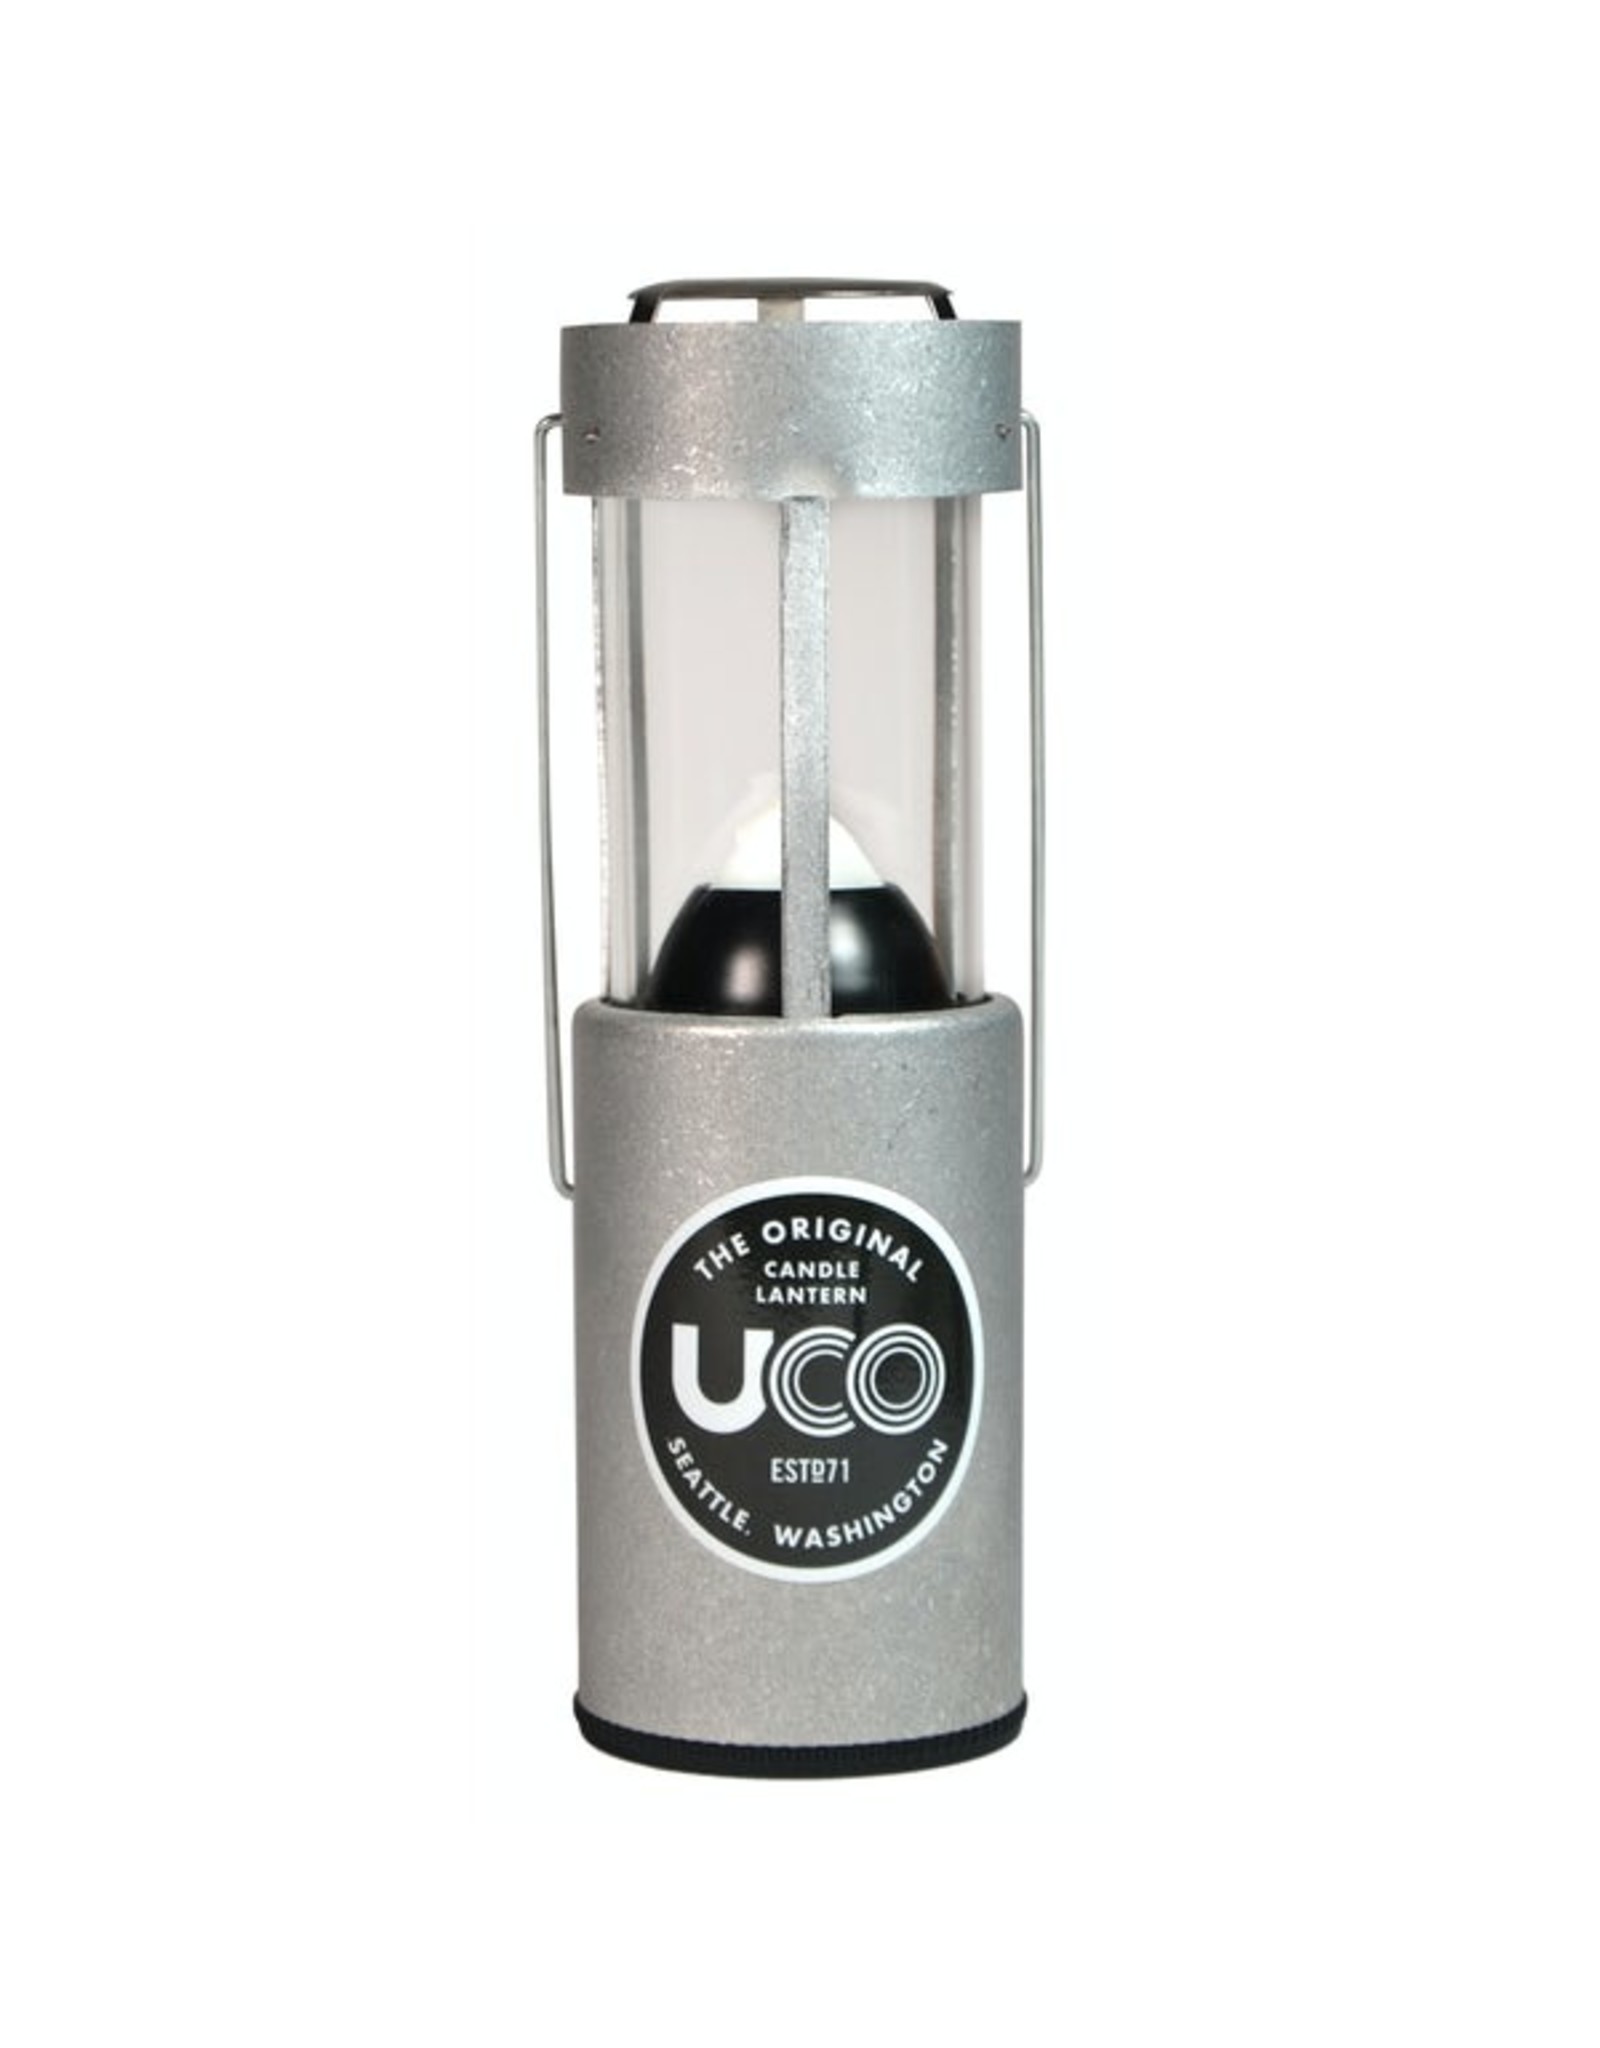 REDPINE OUTDOOR EQUIPMENT UCO CANDLE LANTERN